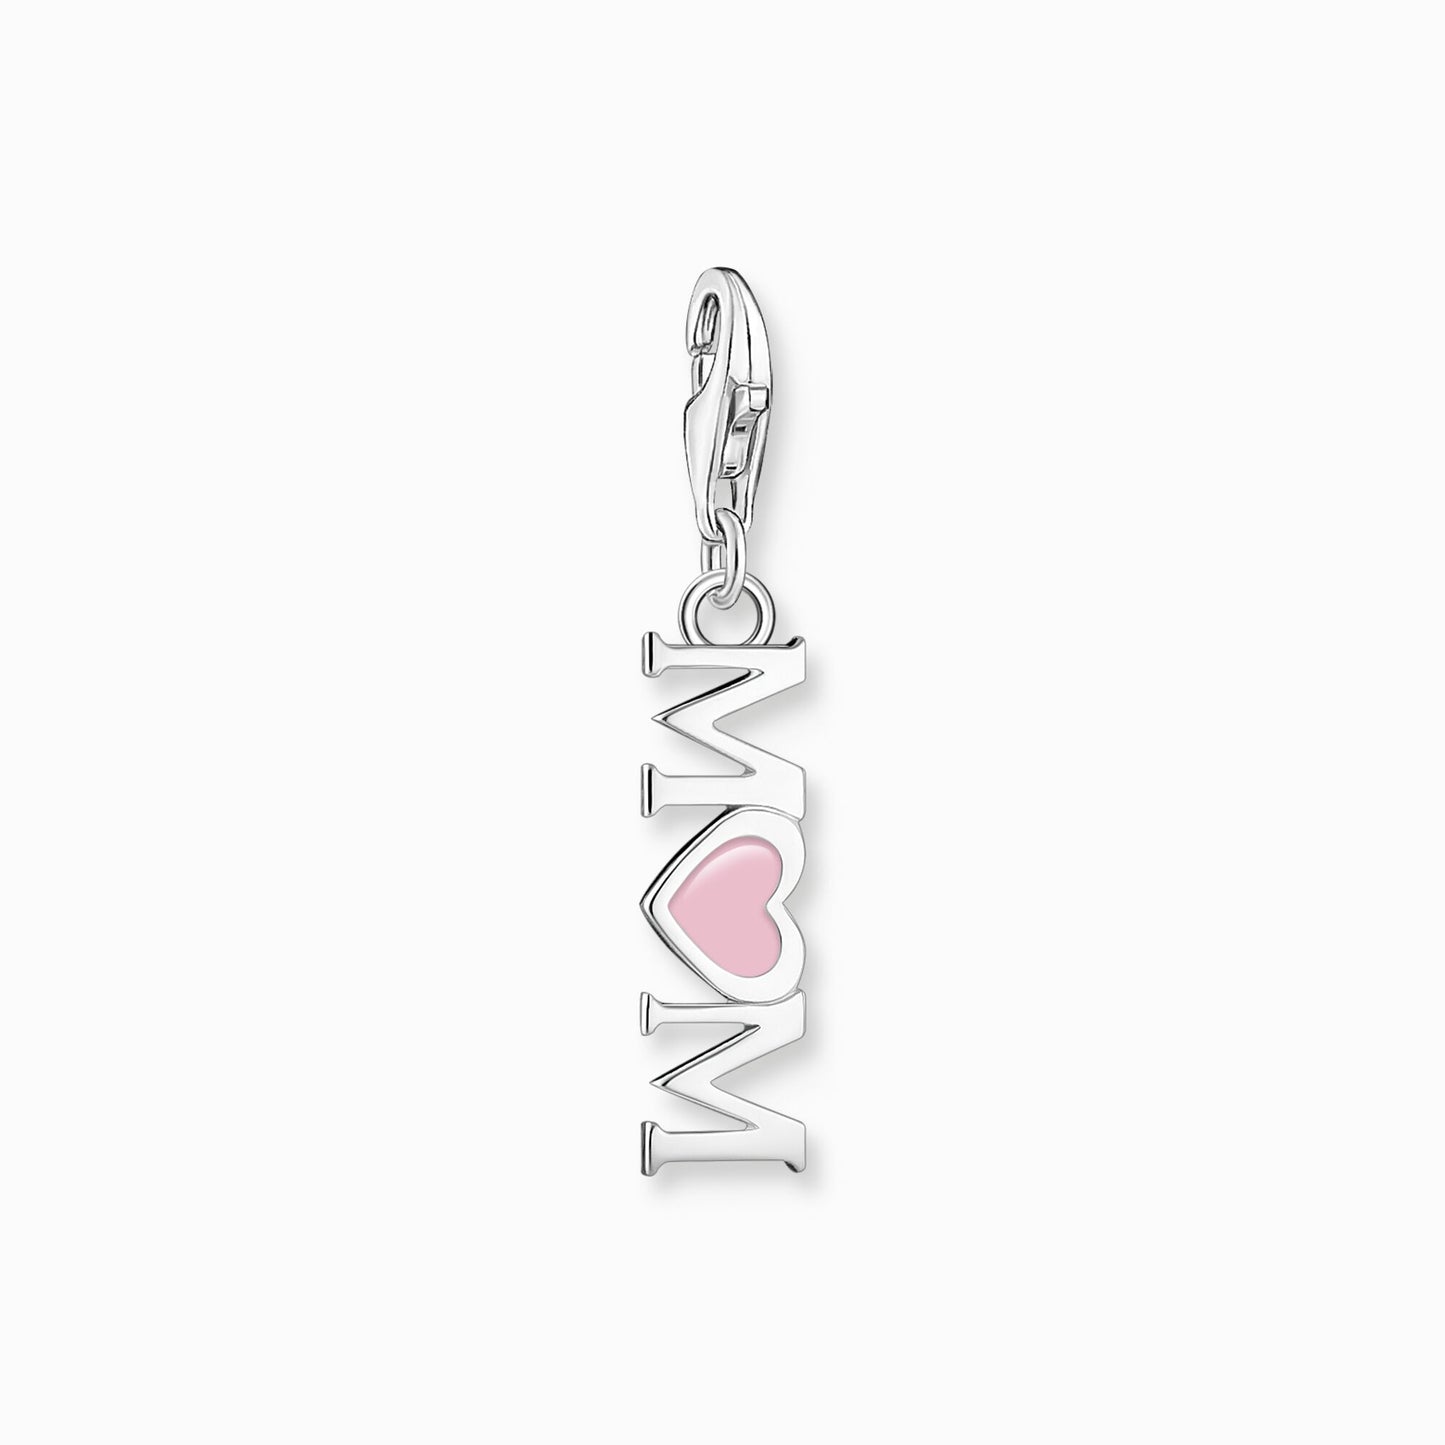 Thomas Sabo Charm Pendant Mom With Pink Heart Silver 2001-007-9